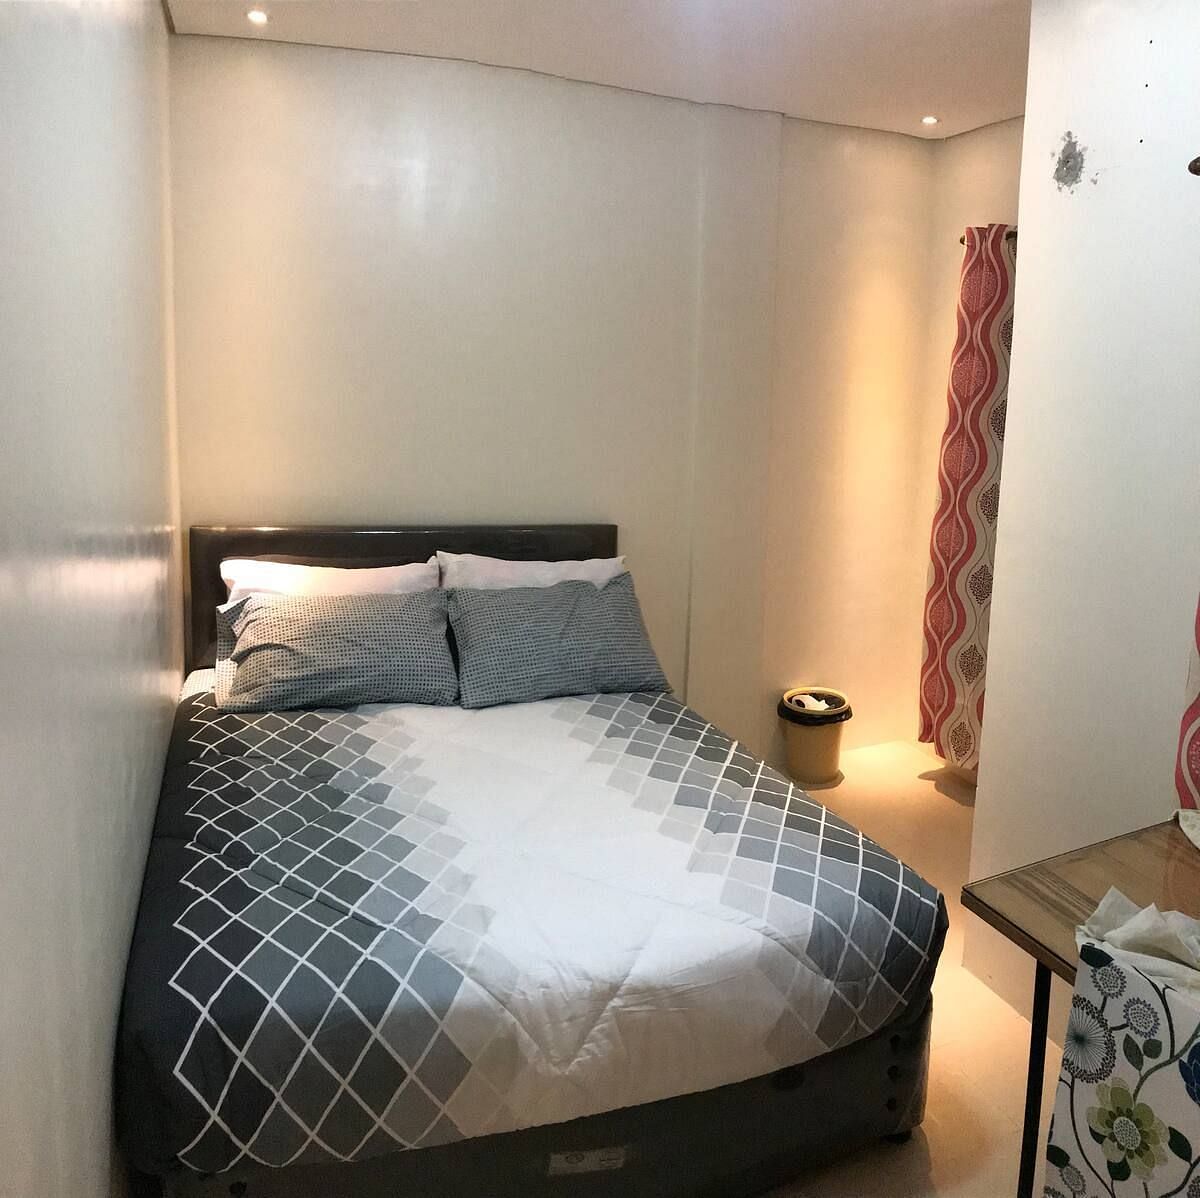 JWguest Townhouse at Talisay, Central Visayas | Townhouse in Bayswater Talisay | Jwbnb no brobnb 8